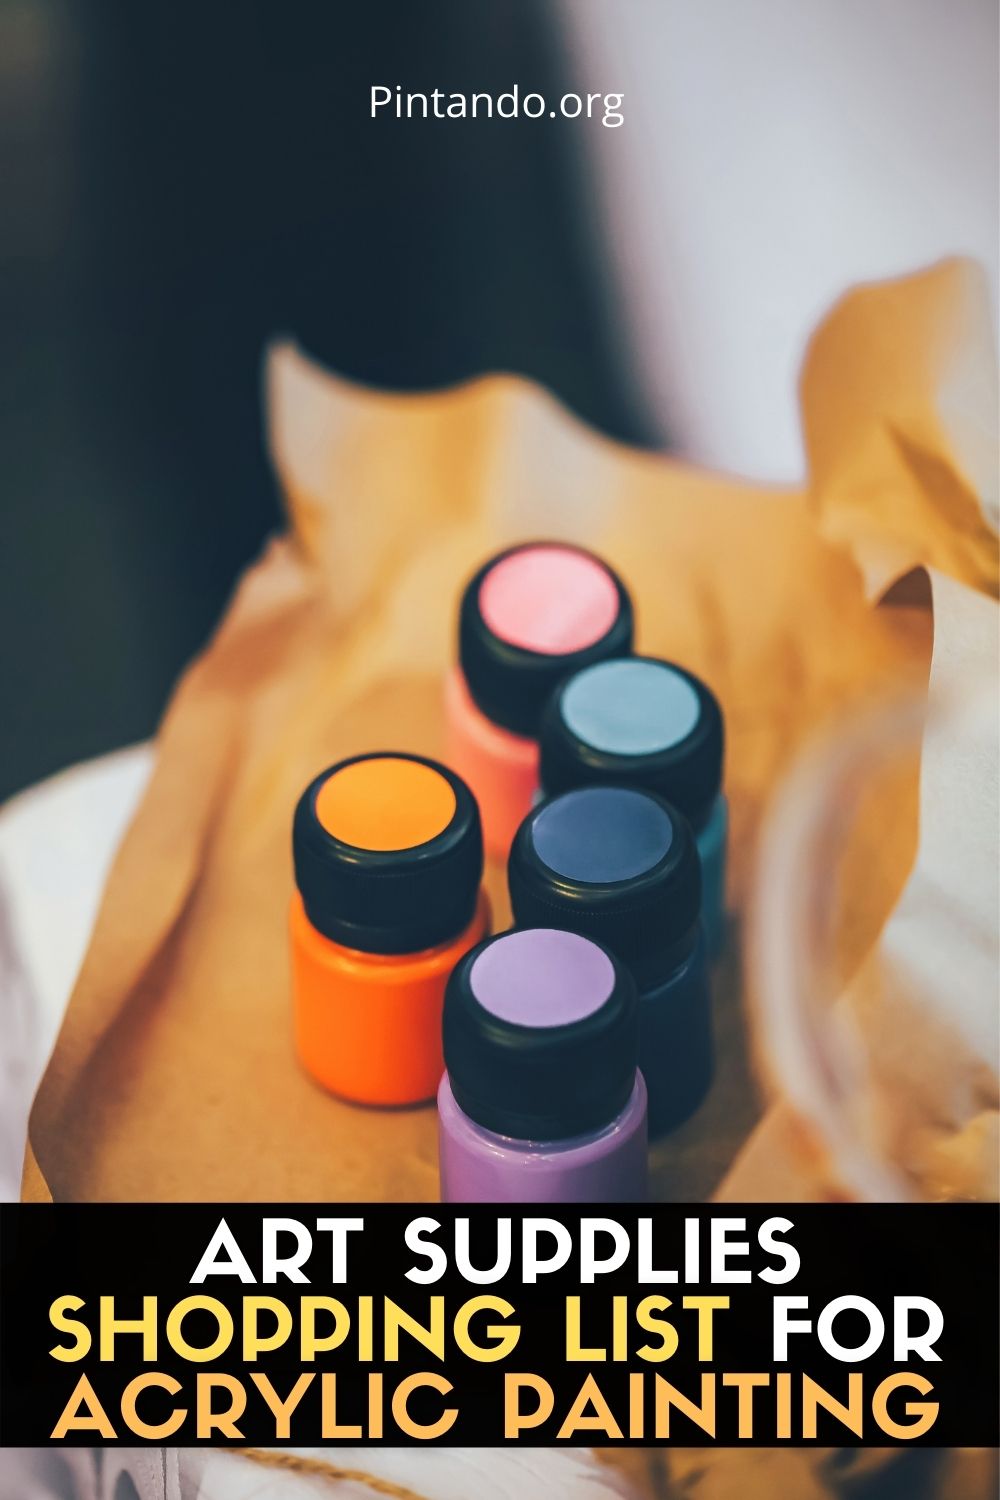 ART SUPPLIES SHOPPING LIST FOR ACRYLIC PAINTING